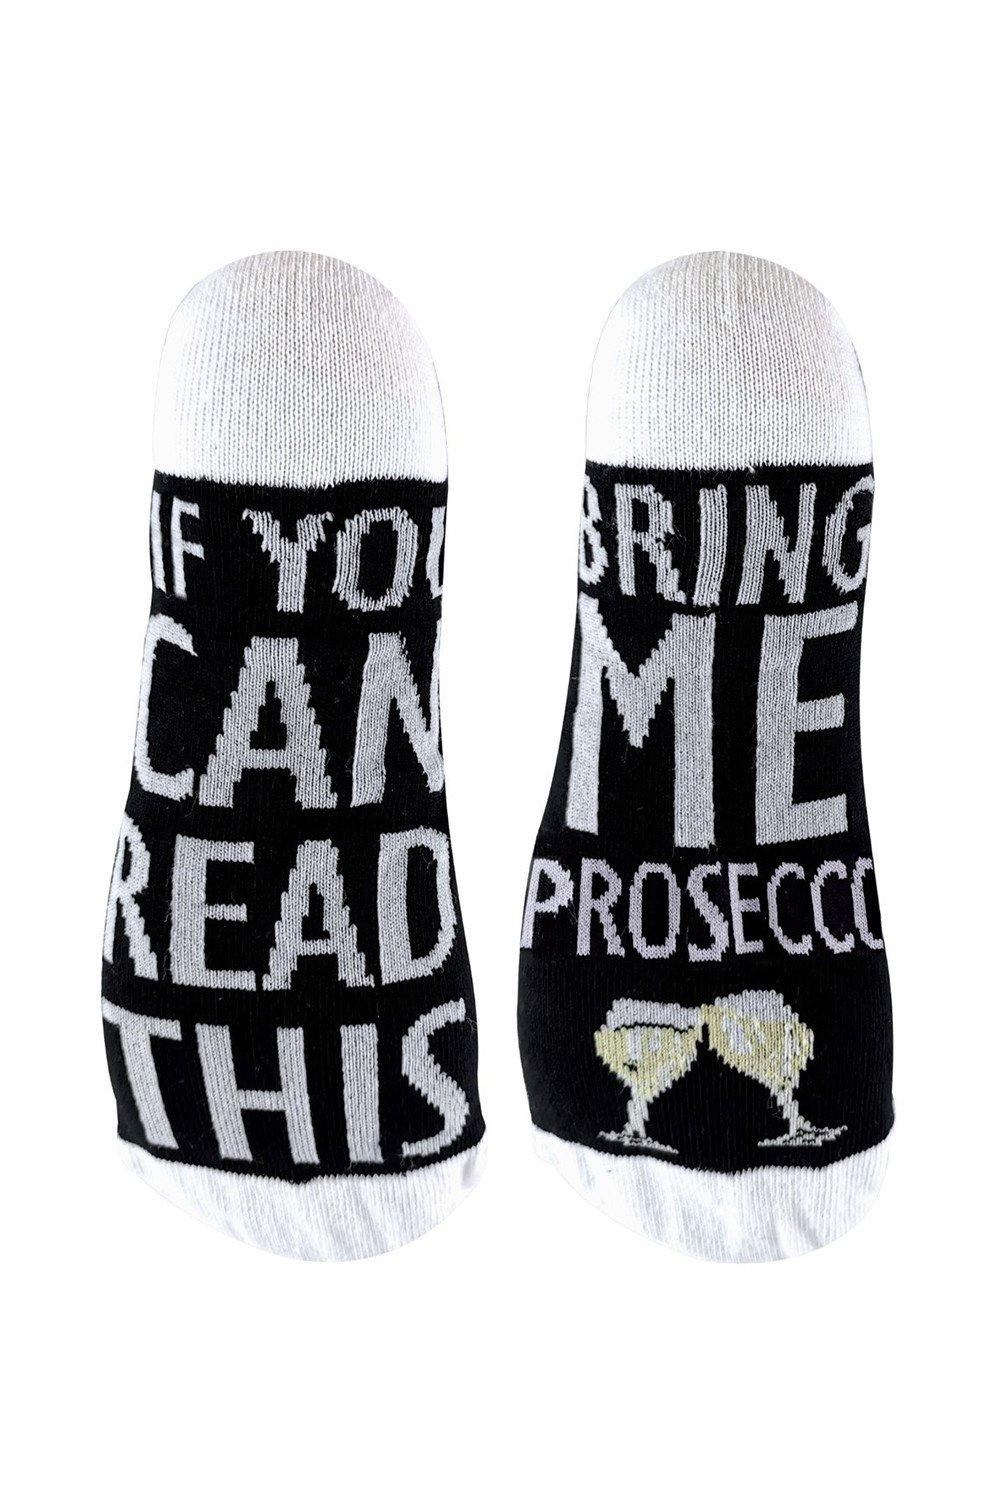 If You Can Read This Socks Bring Me - Wine Beer Gin Tea Coffee Pizza